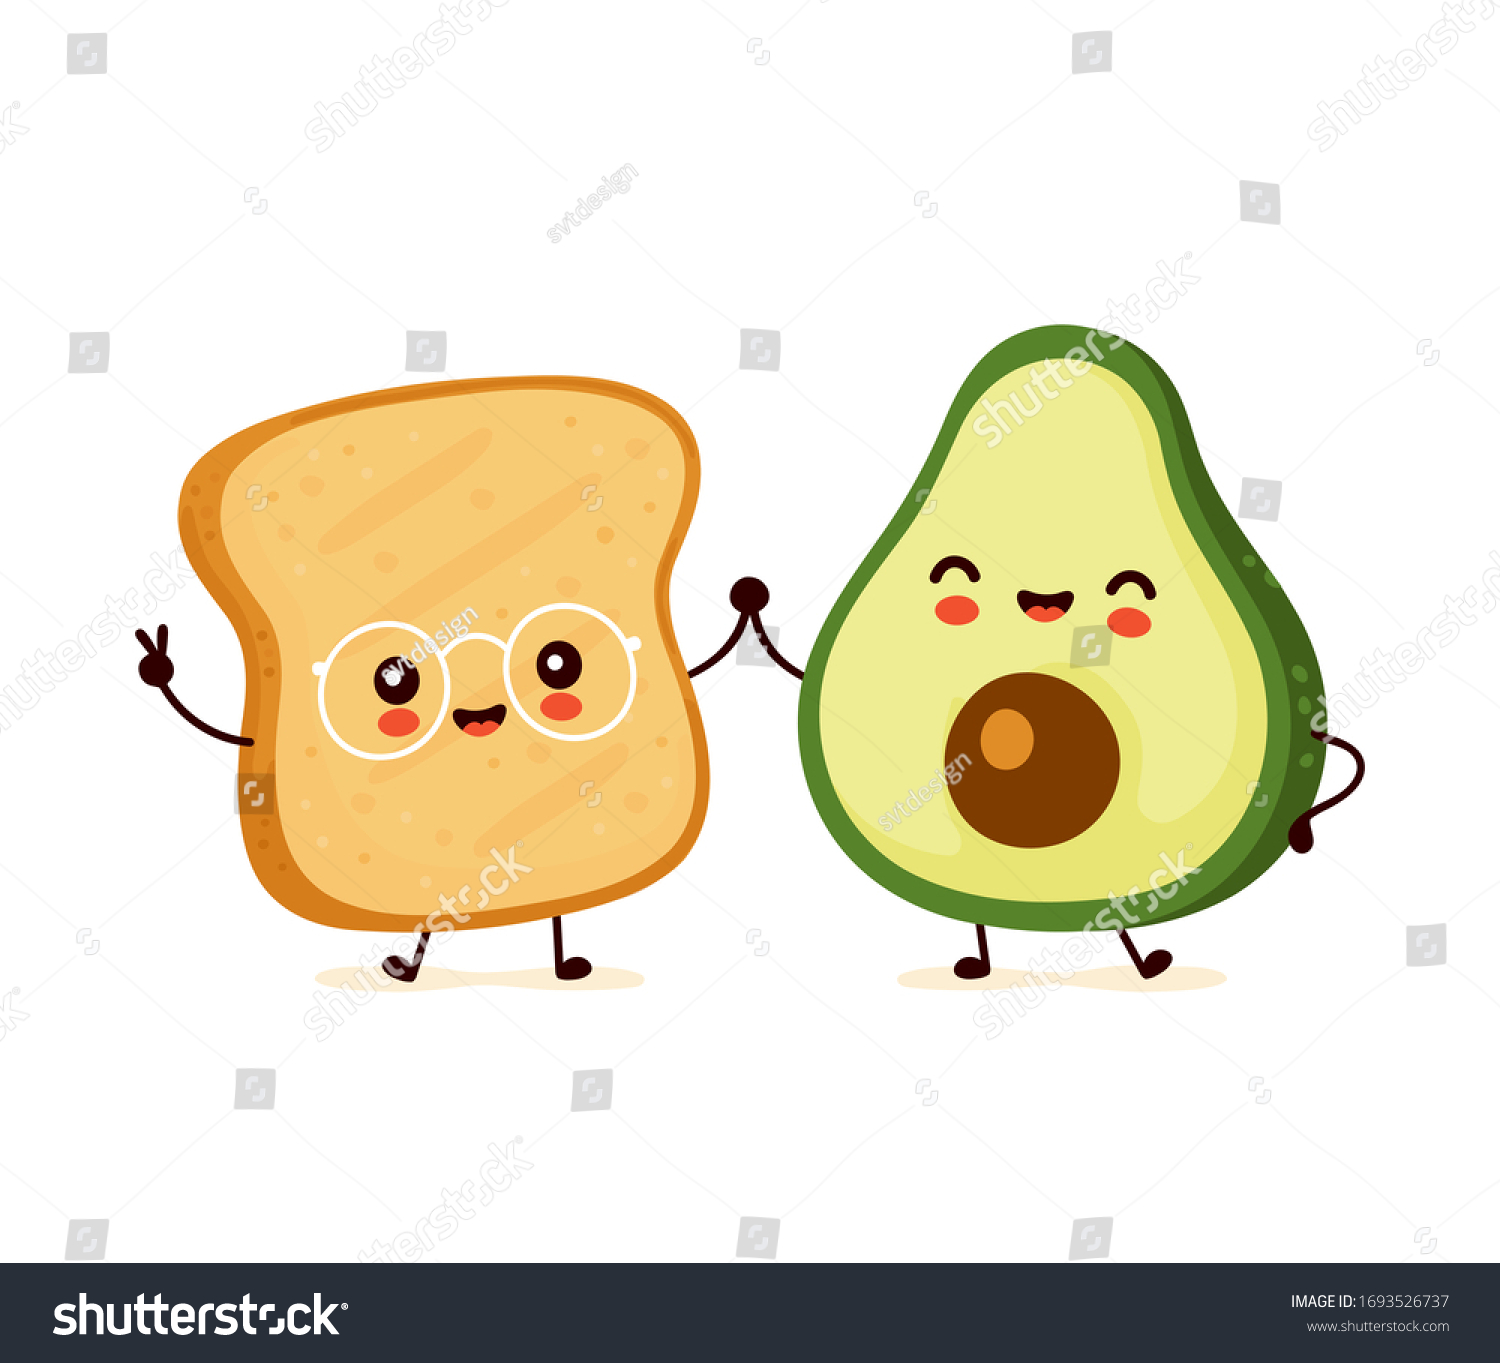 SVG of Cute happy funny toast and avocado. Vector cartoon character illustration icon design.Isolated on white background svg